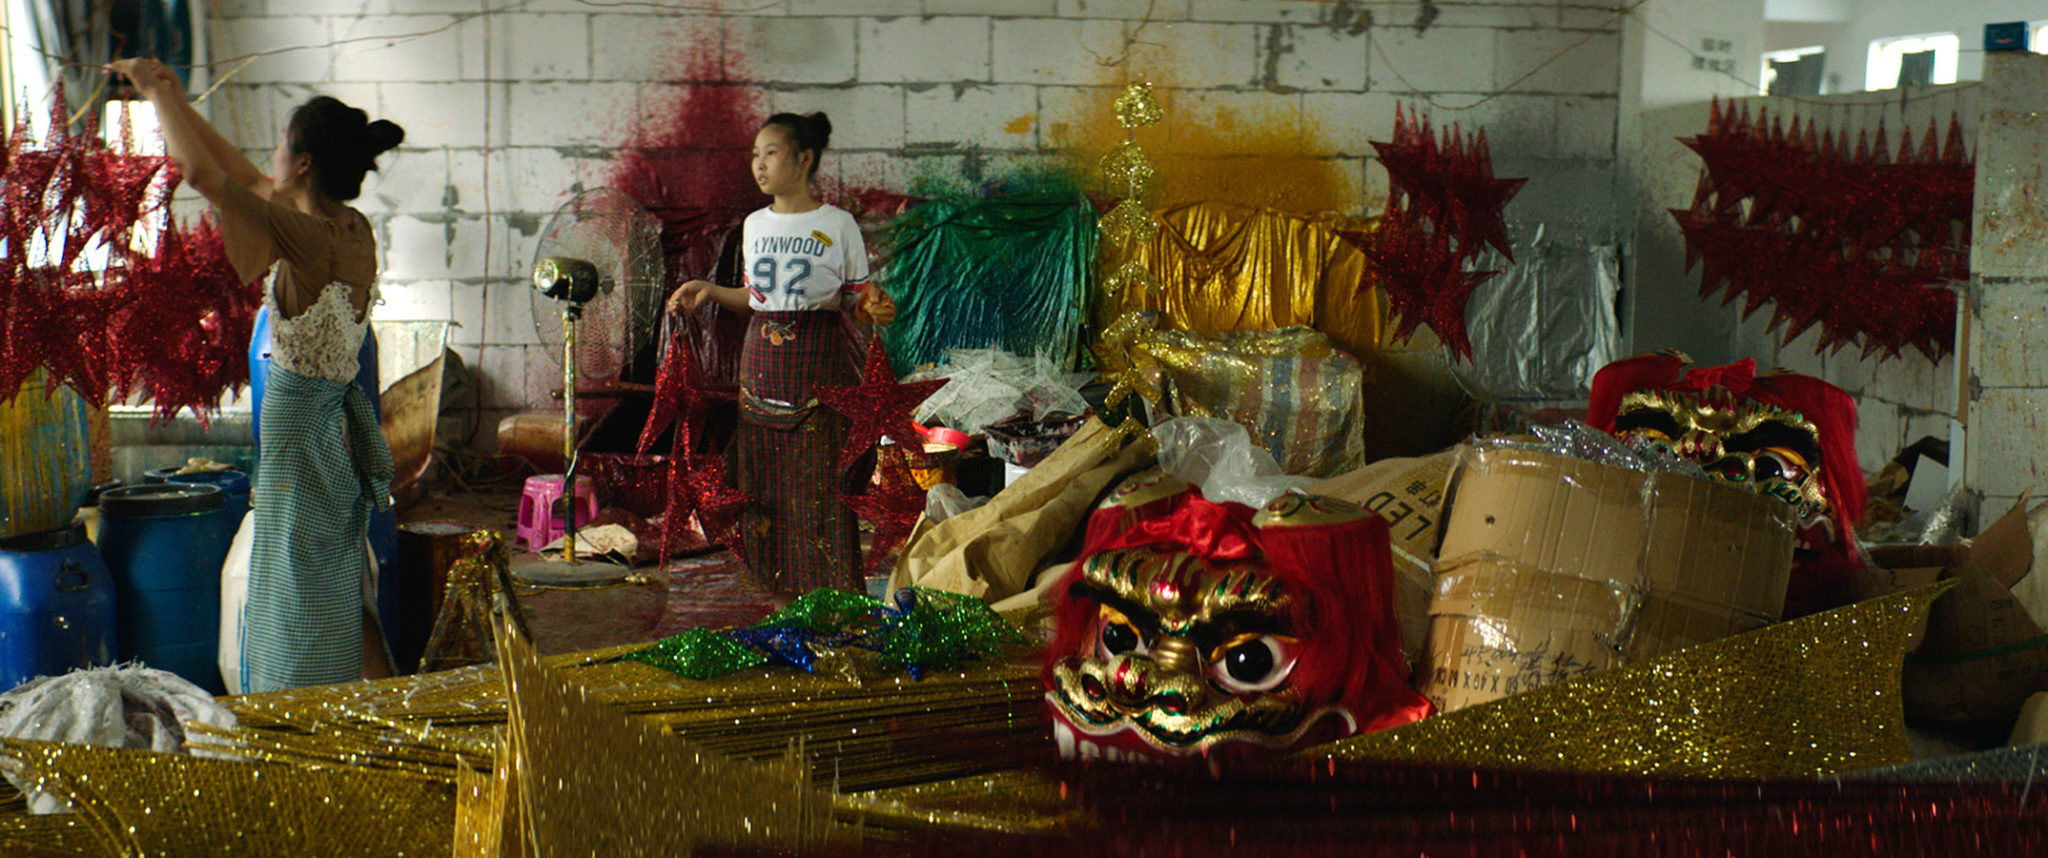 Architecture on Film: Merry Christmas, Yiwu [UK Premiere] + Q&A